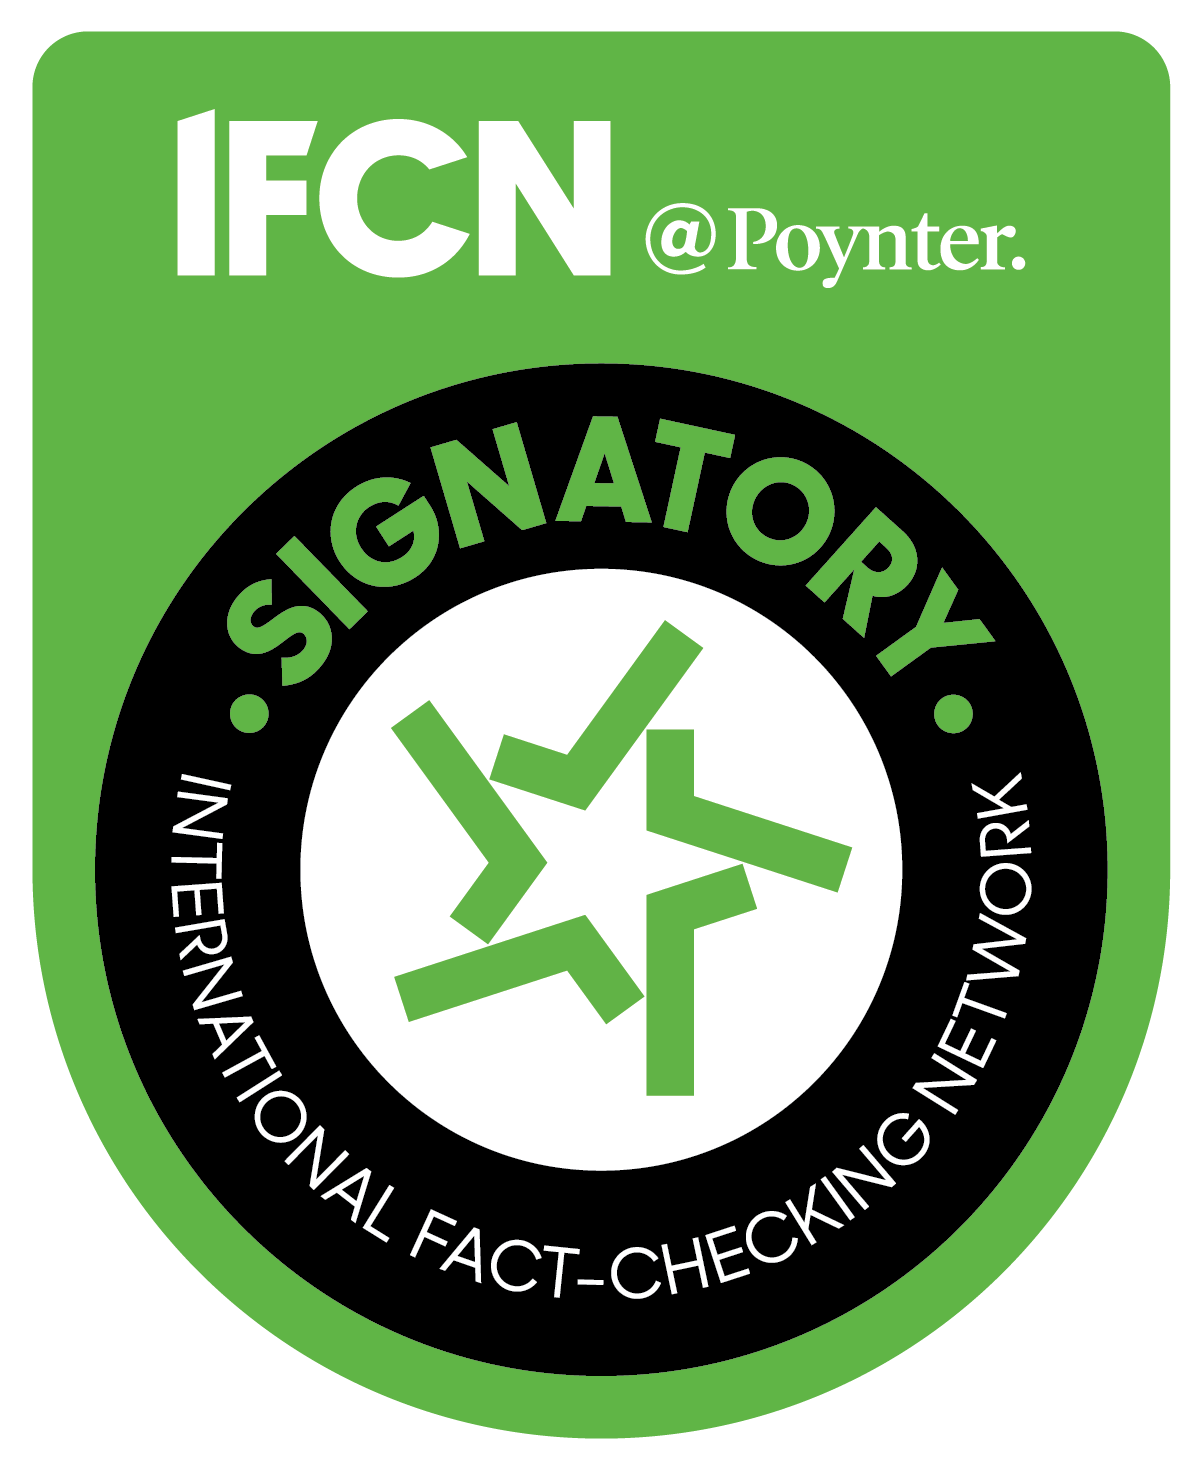 Verified Member badge of IFCN (International Fact-Checking Network)